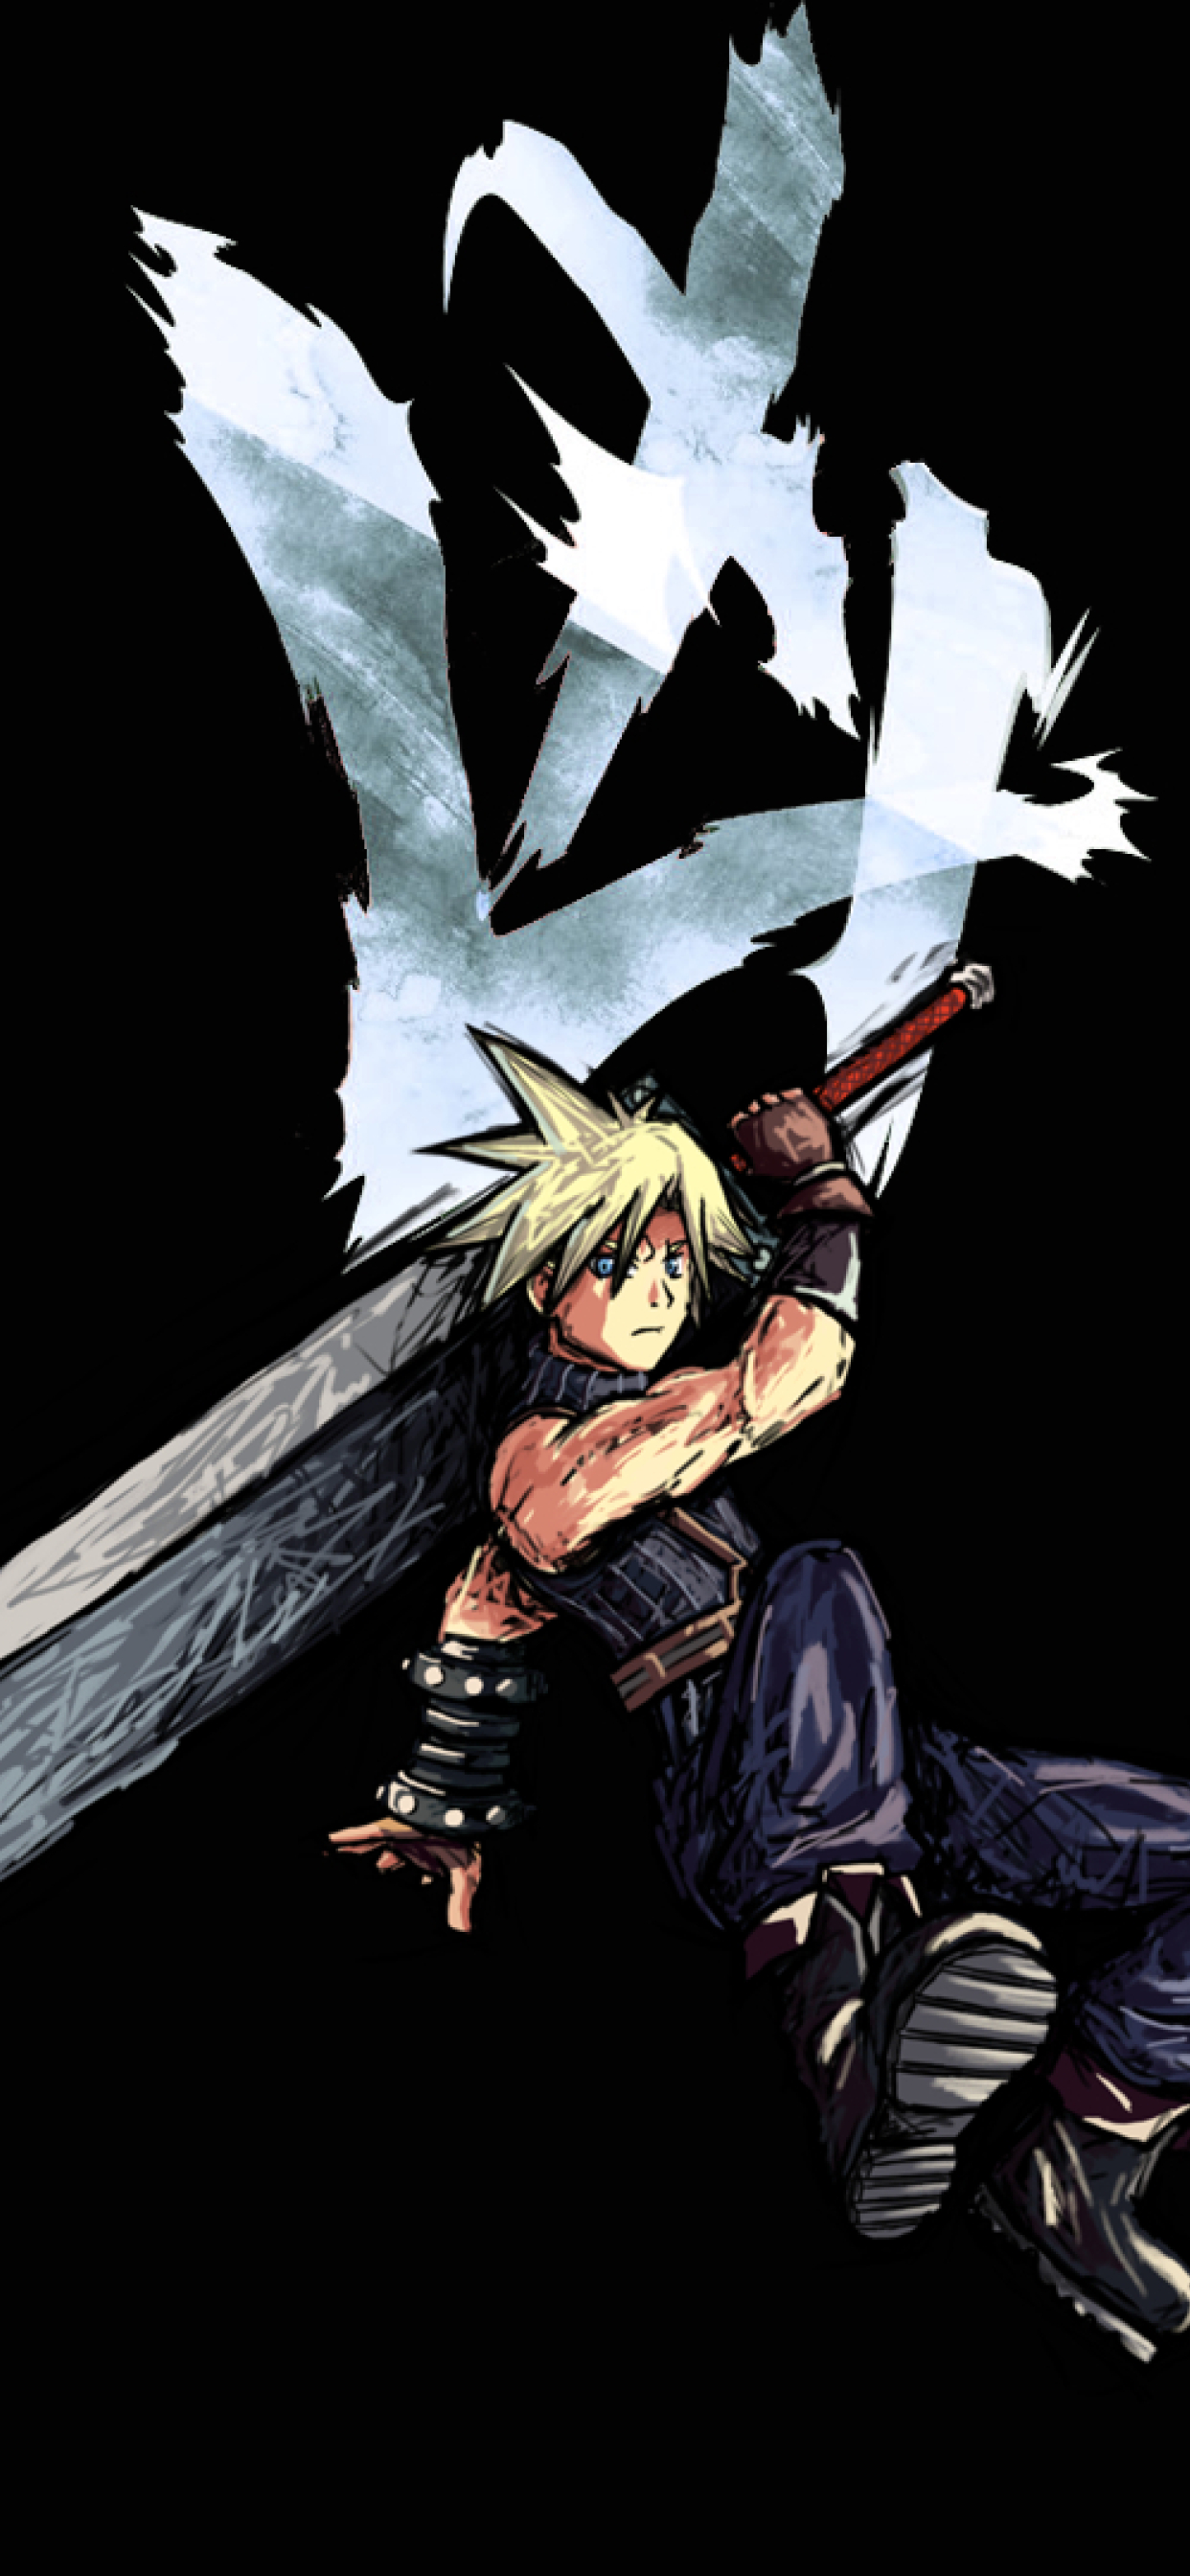 1242x26 Cloud Strife Final Fantasy Iphone Xs Max Wallpaper Hd Games 4k Wallpapers Images Photos And Background Wallpapers Den